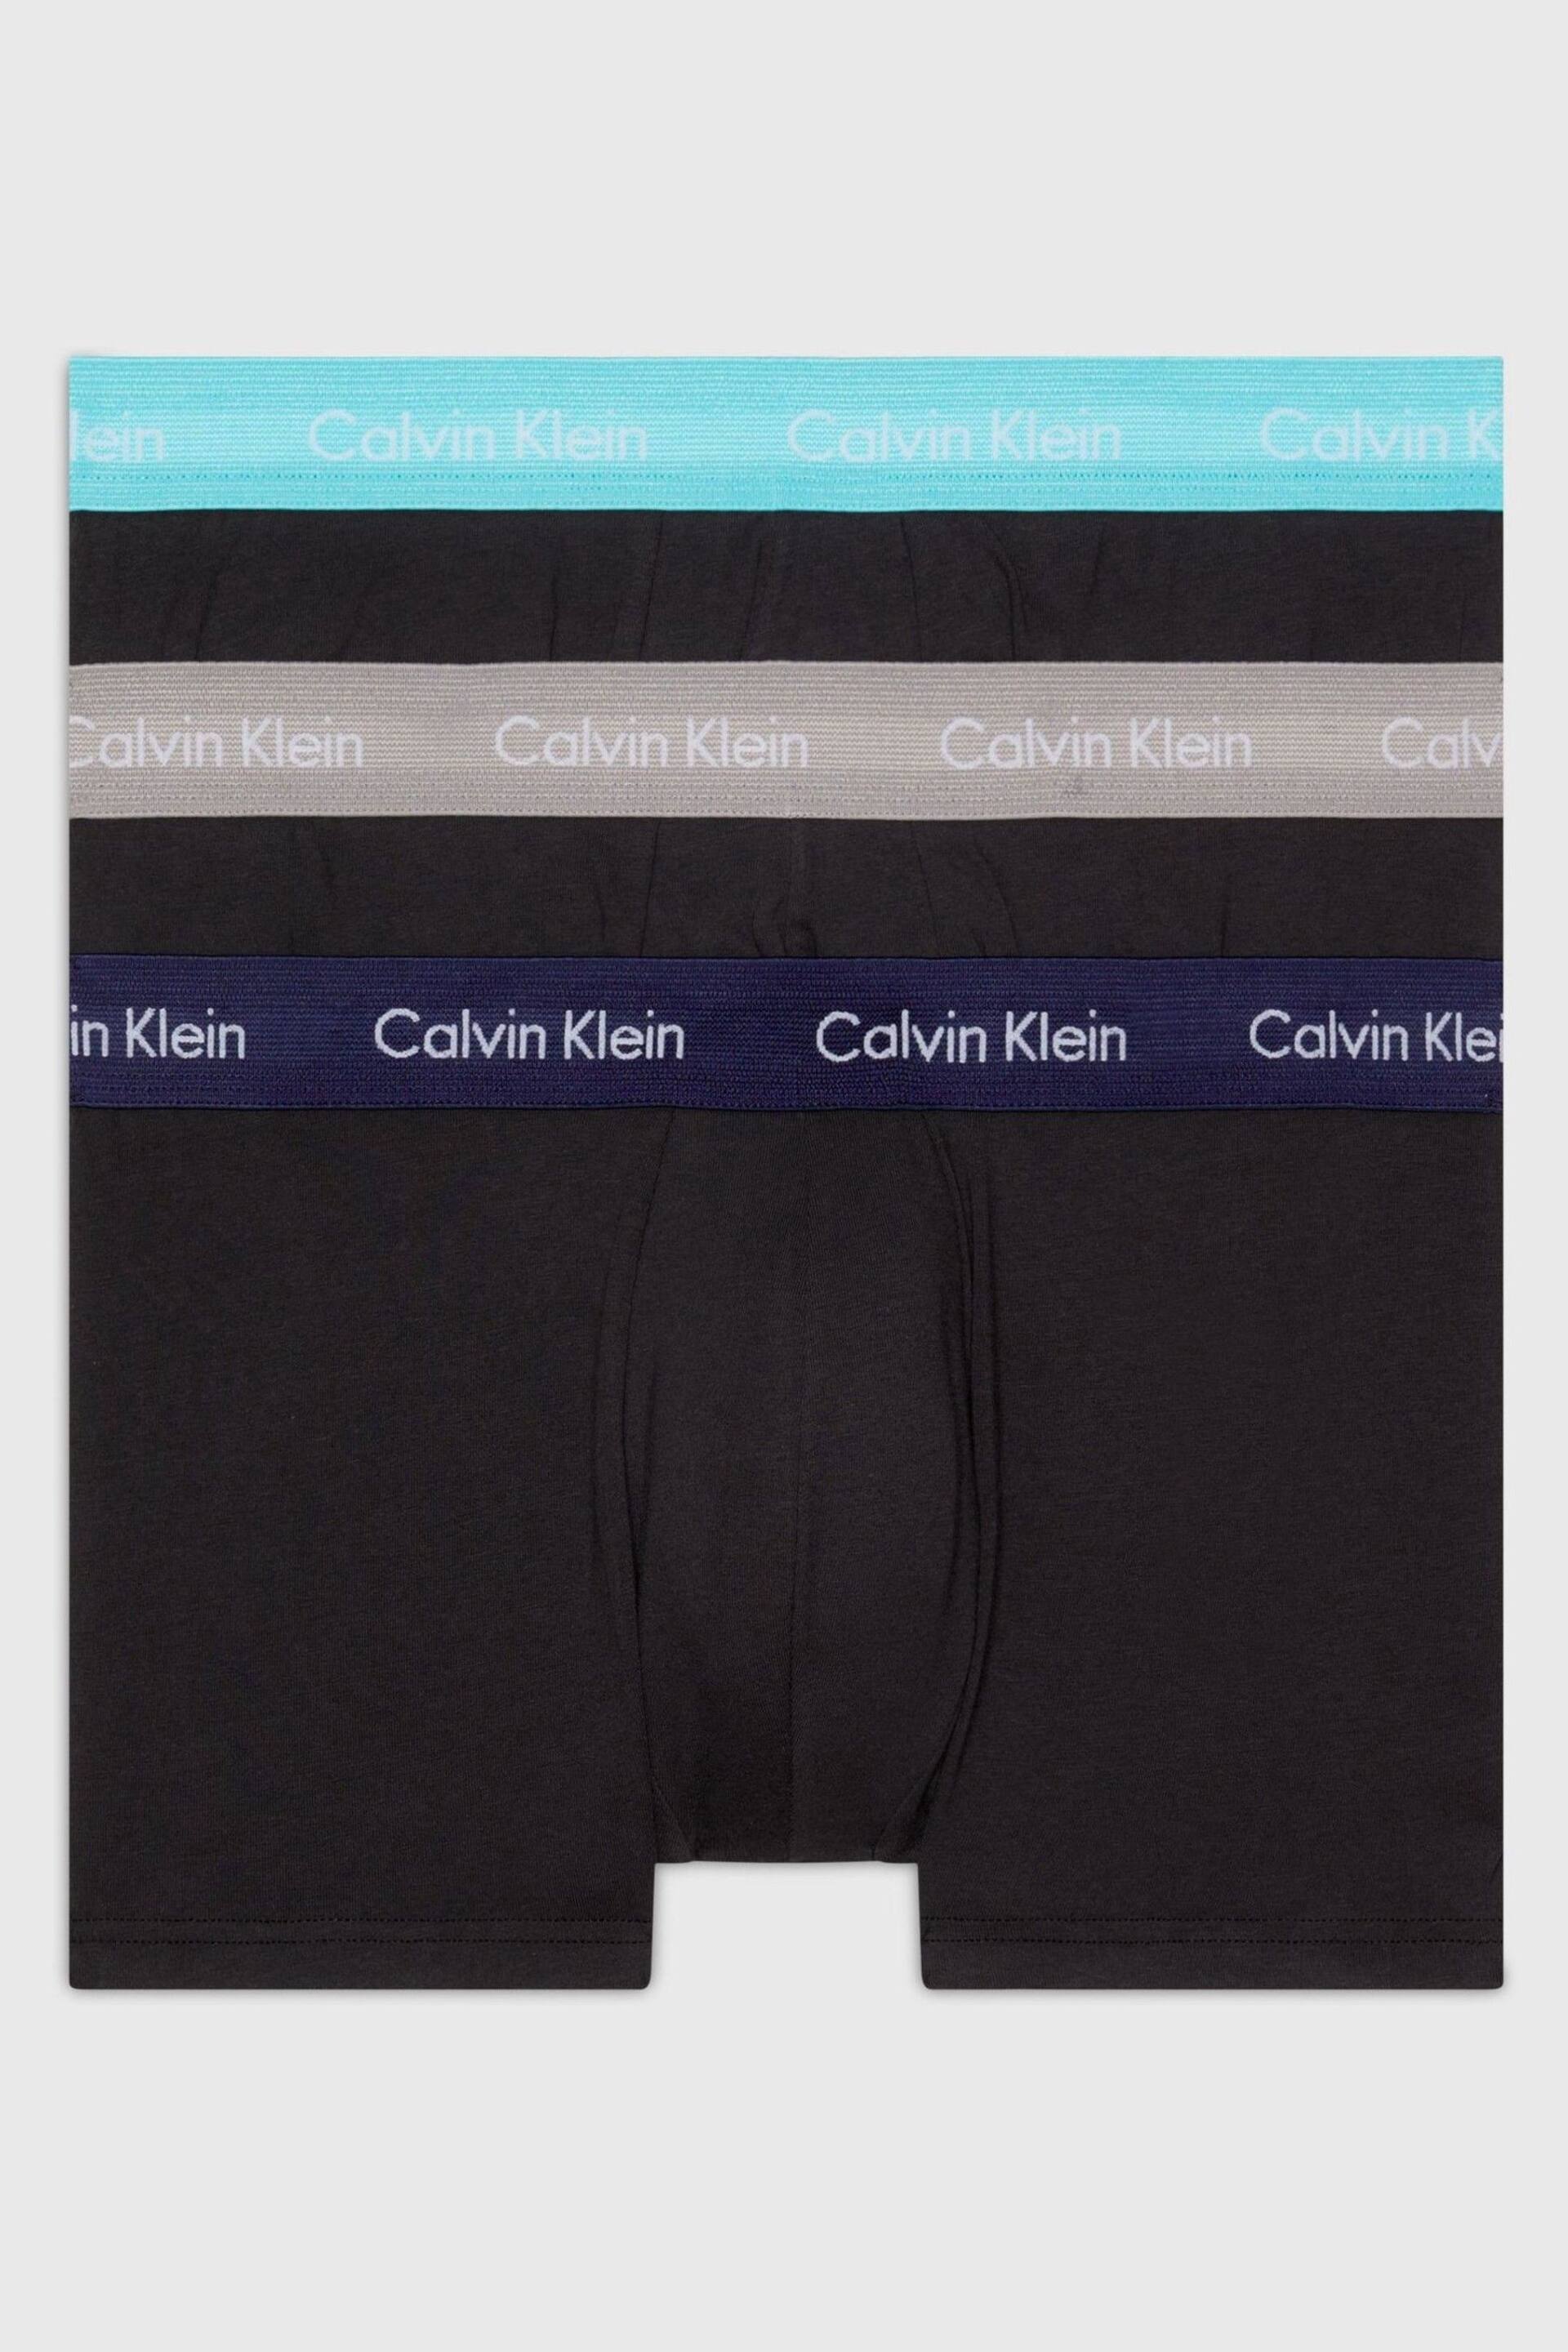 Calvin Klein Black Low Rise Boxers 3 Pack - Image 2 of 2